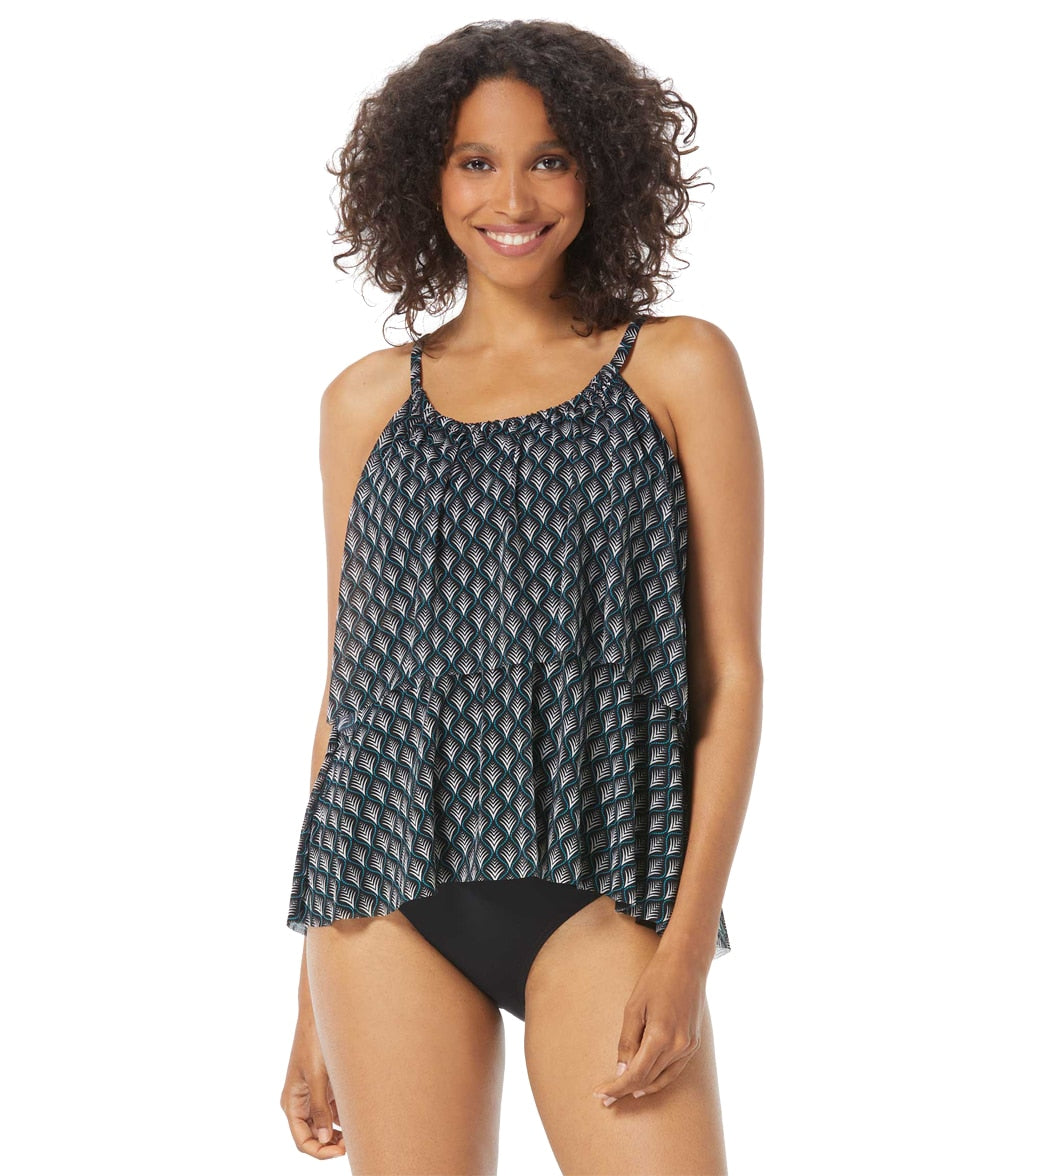 Coco Reef Current Mesh-layer Bra-sized Tankini Top & Bottoms in